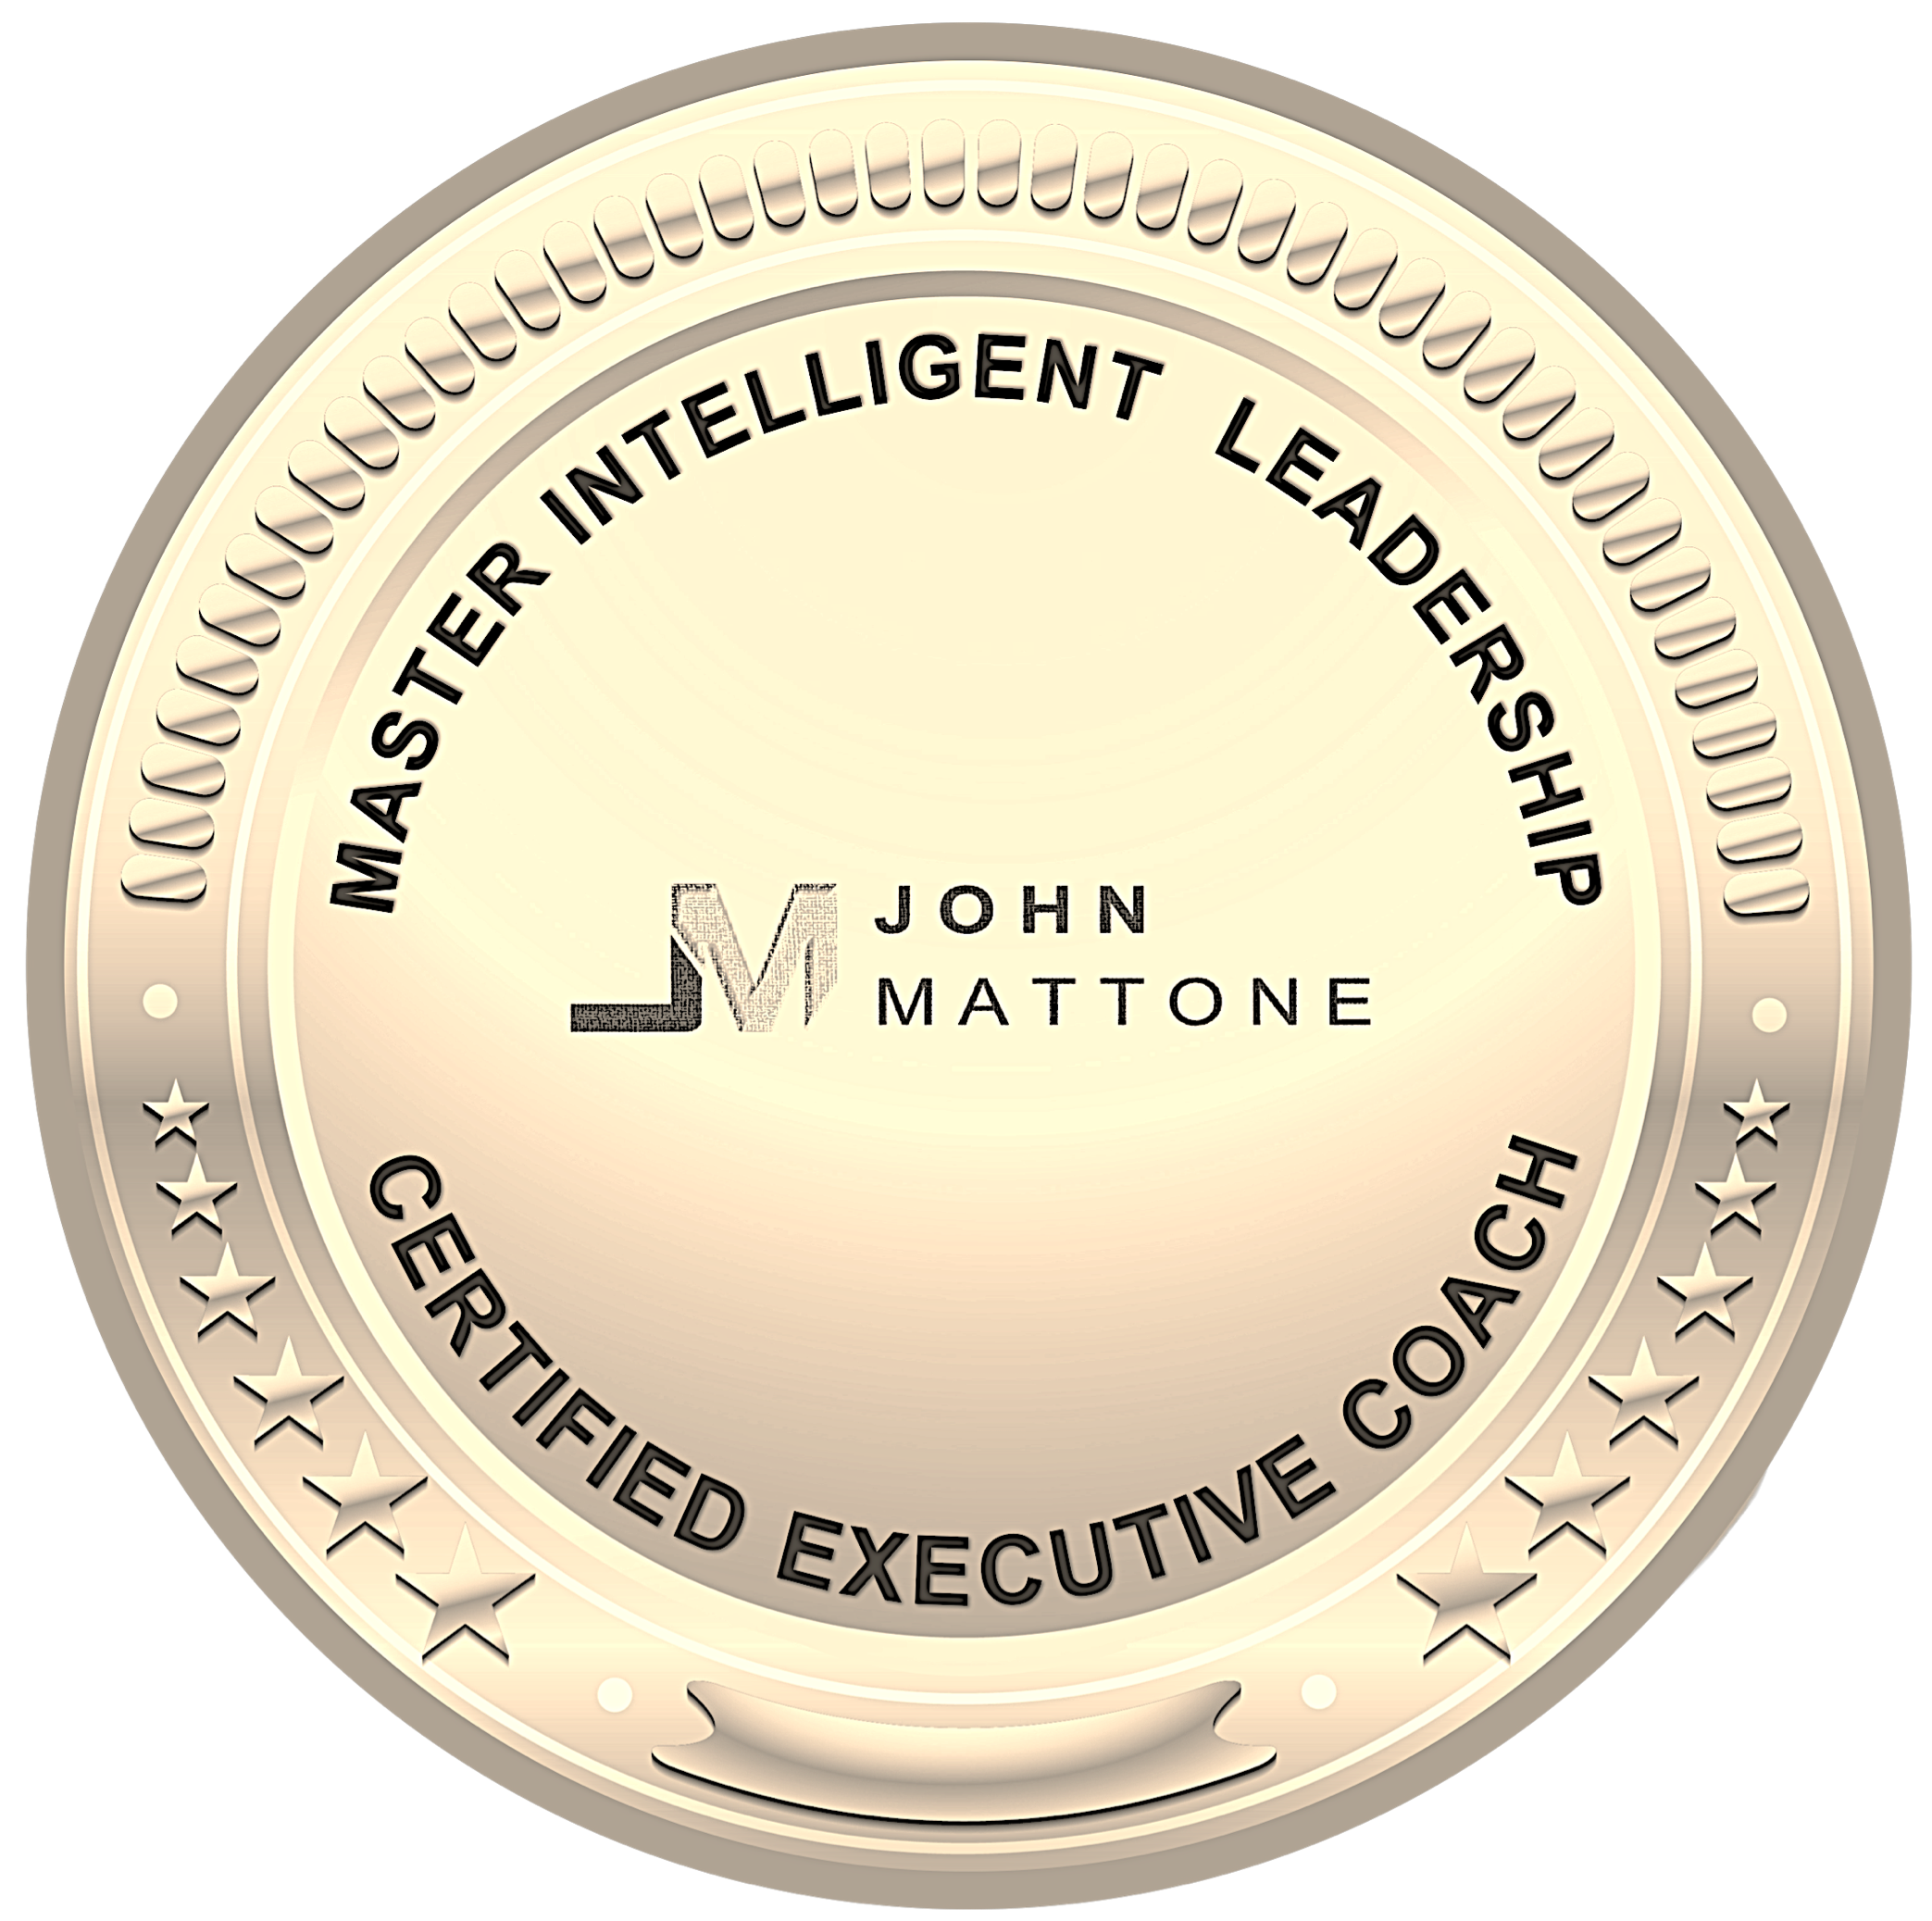 Nick Roud - #1 Master Certified Executive Coach on Intelligent Leadership in New Zealand.